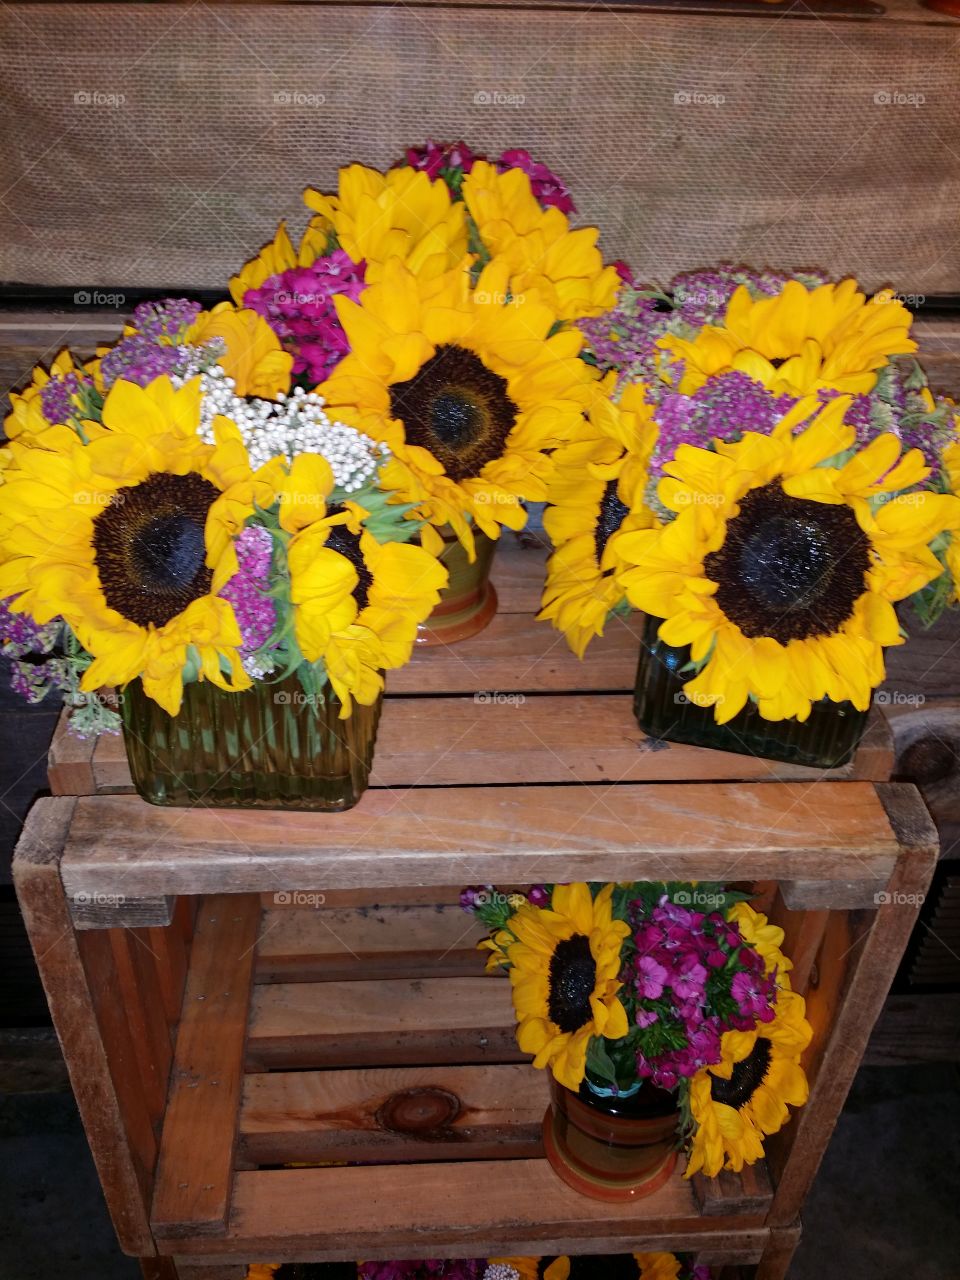 Summer Sunflowers. shopping and saw these beautiful sun flowers which I loved